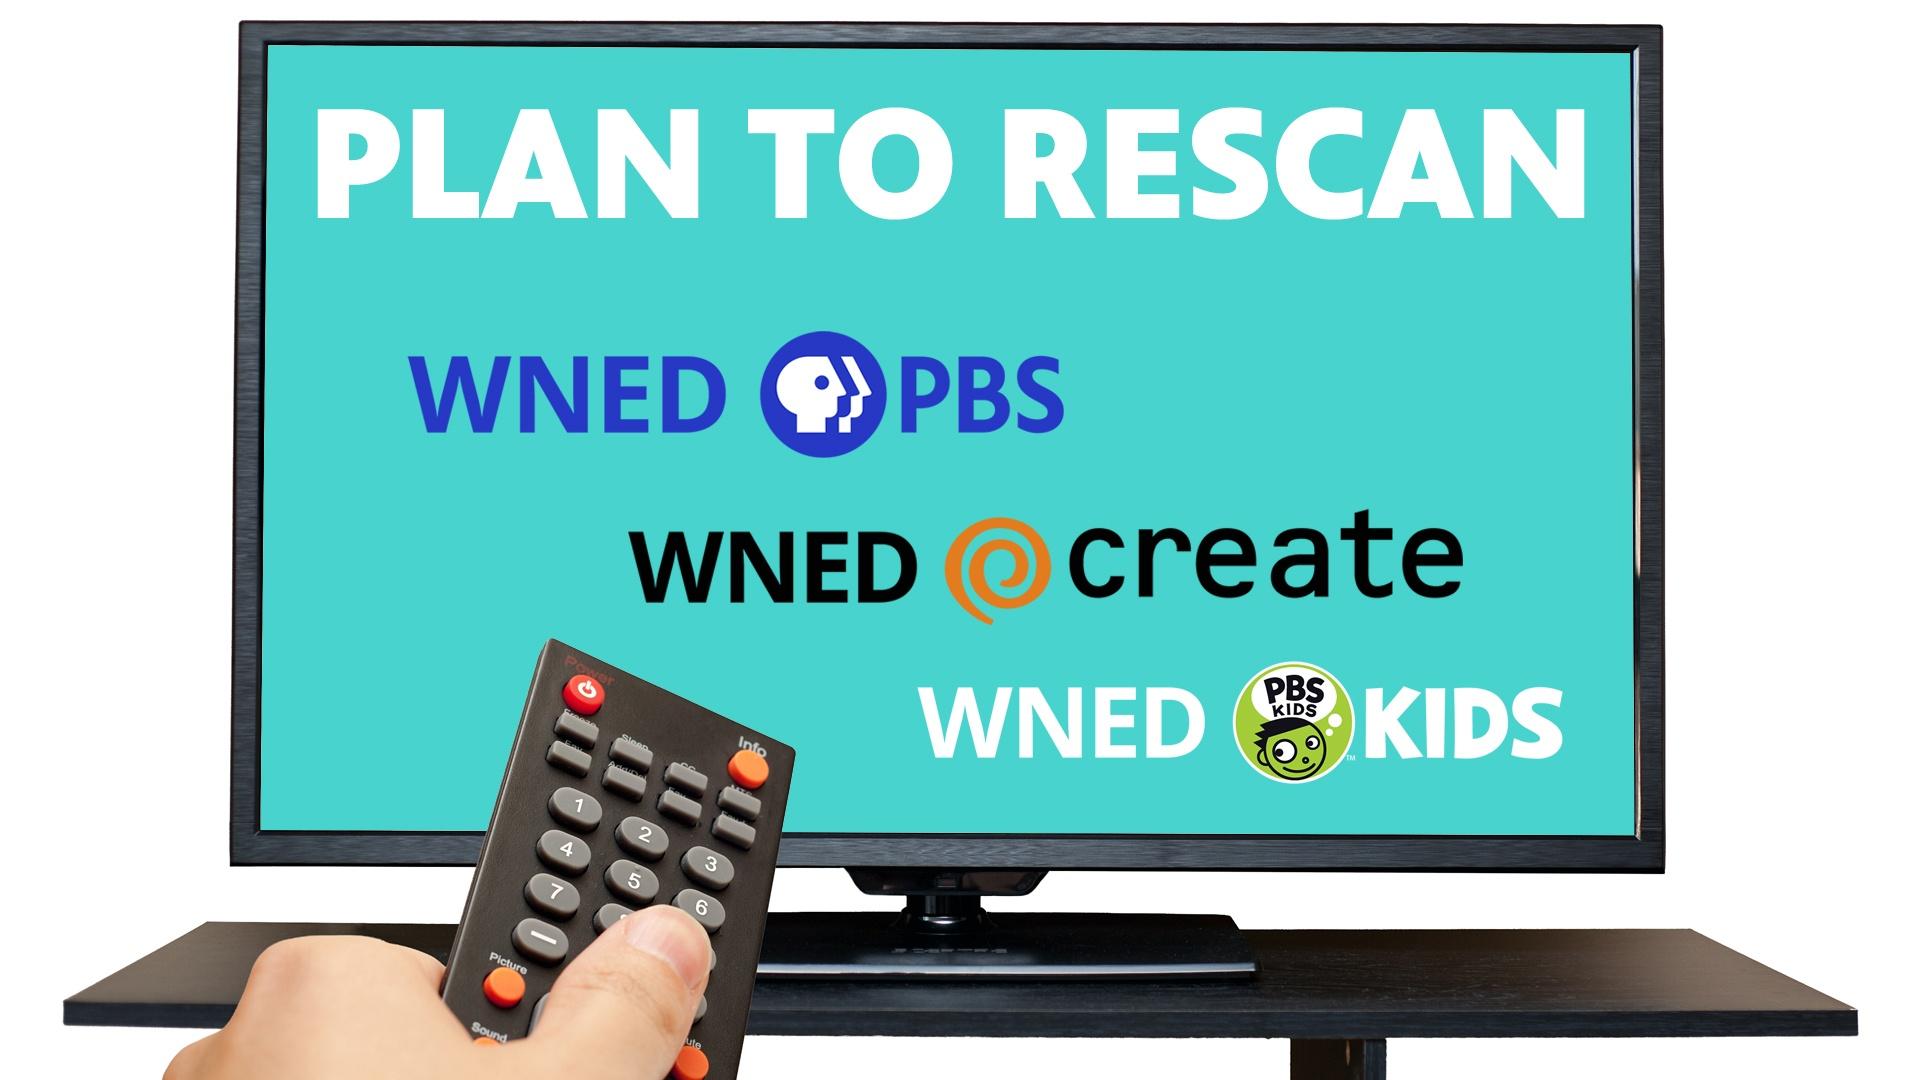 television with "Plan to Rescan" message